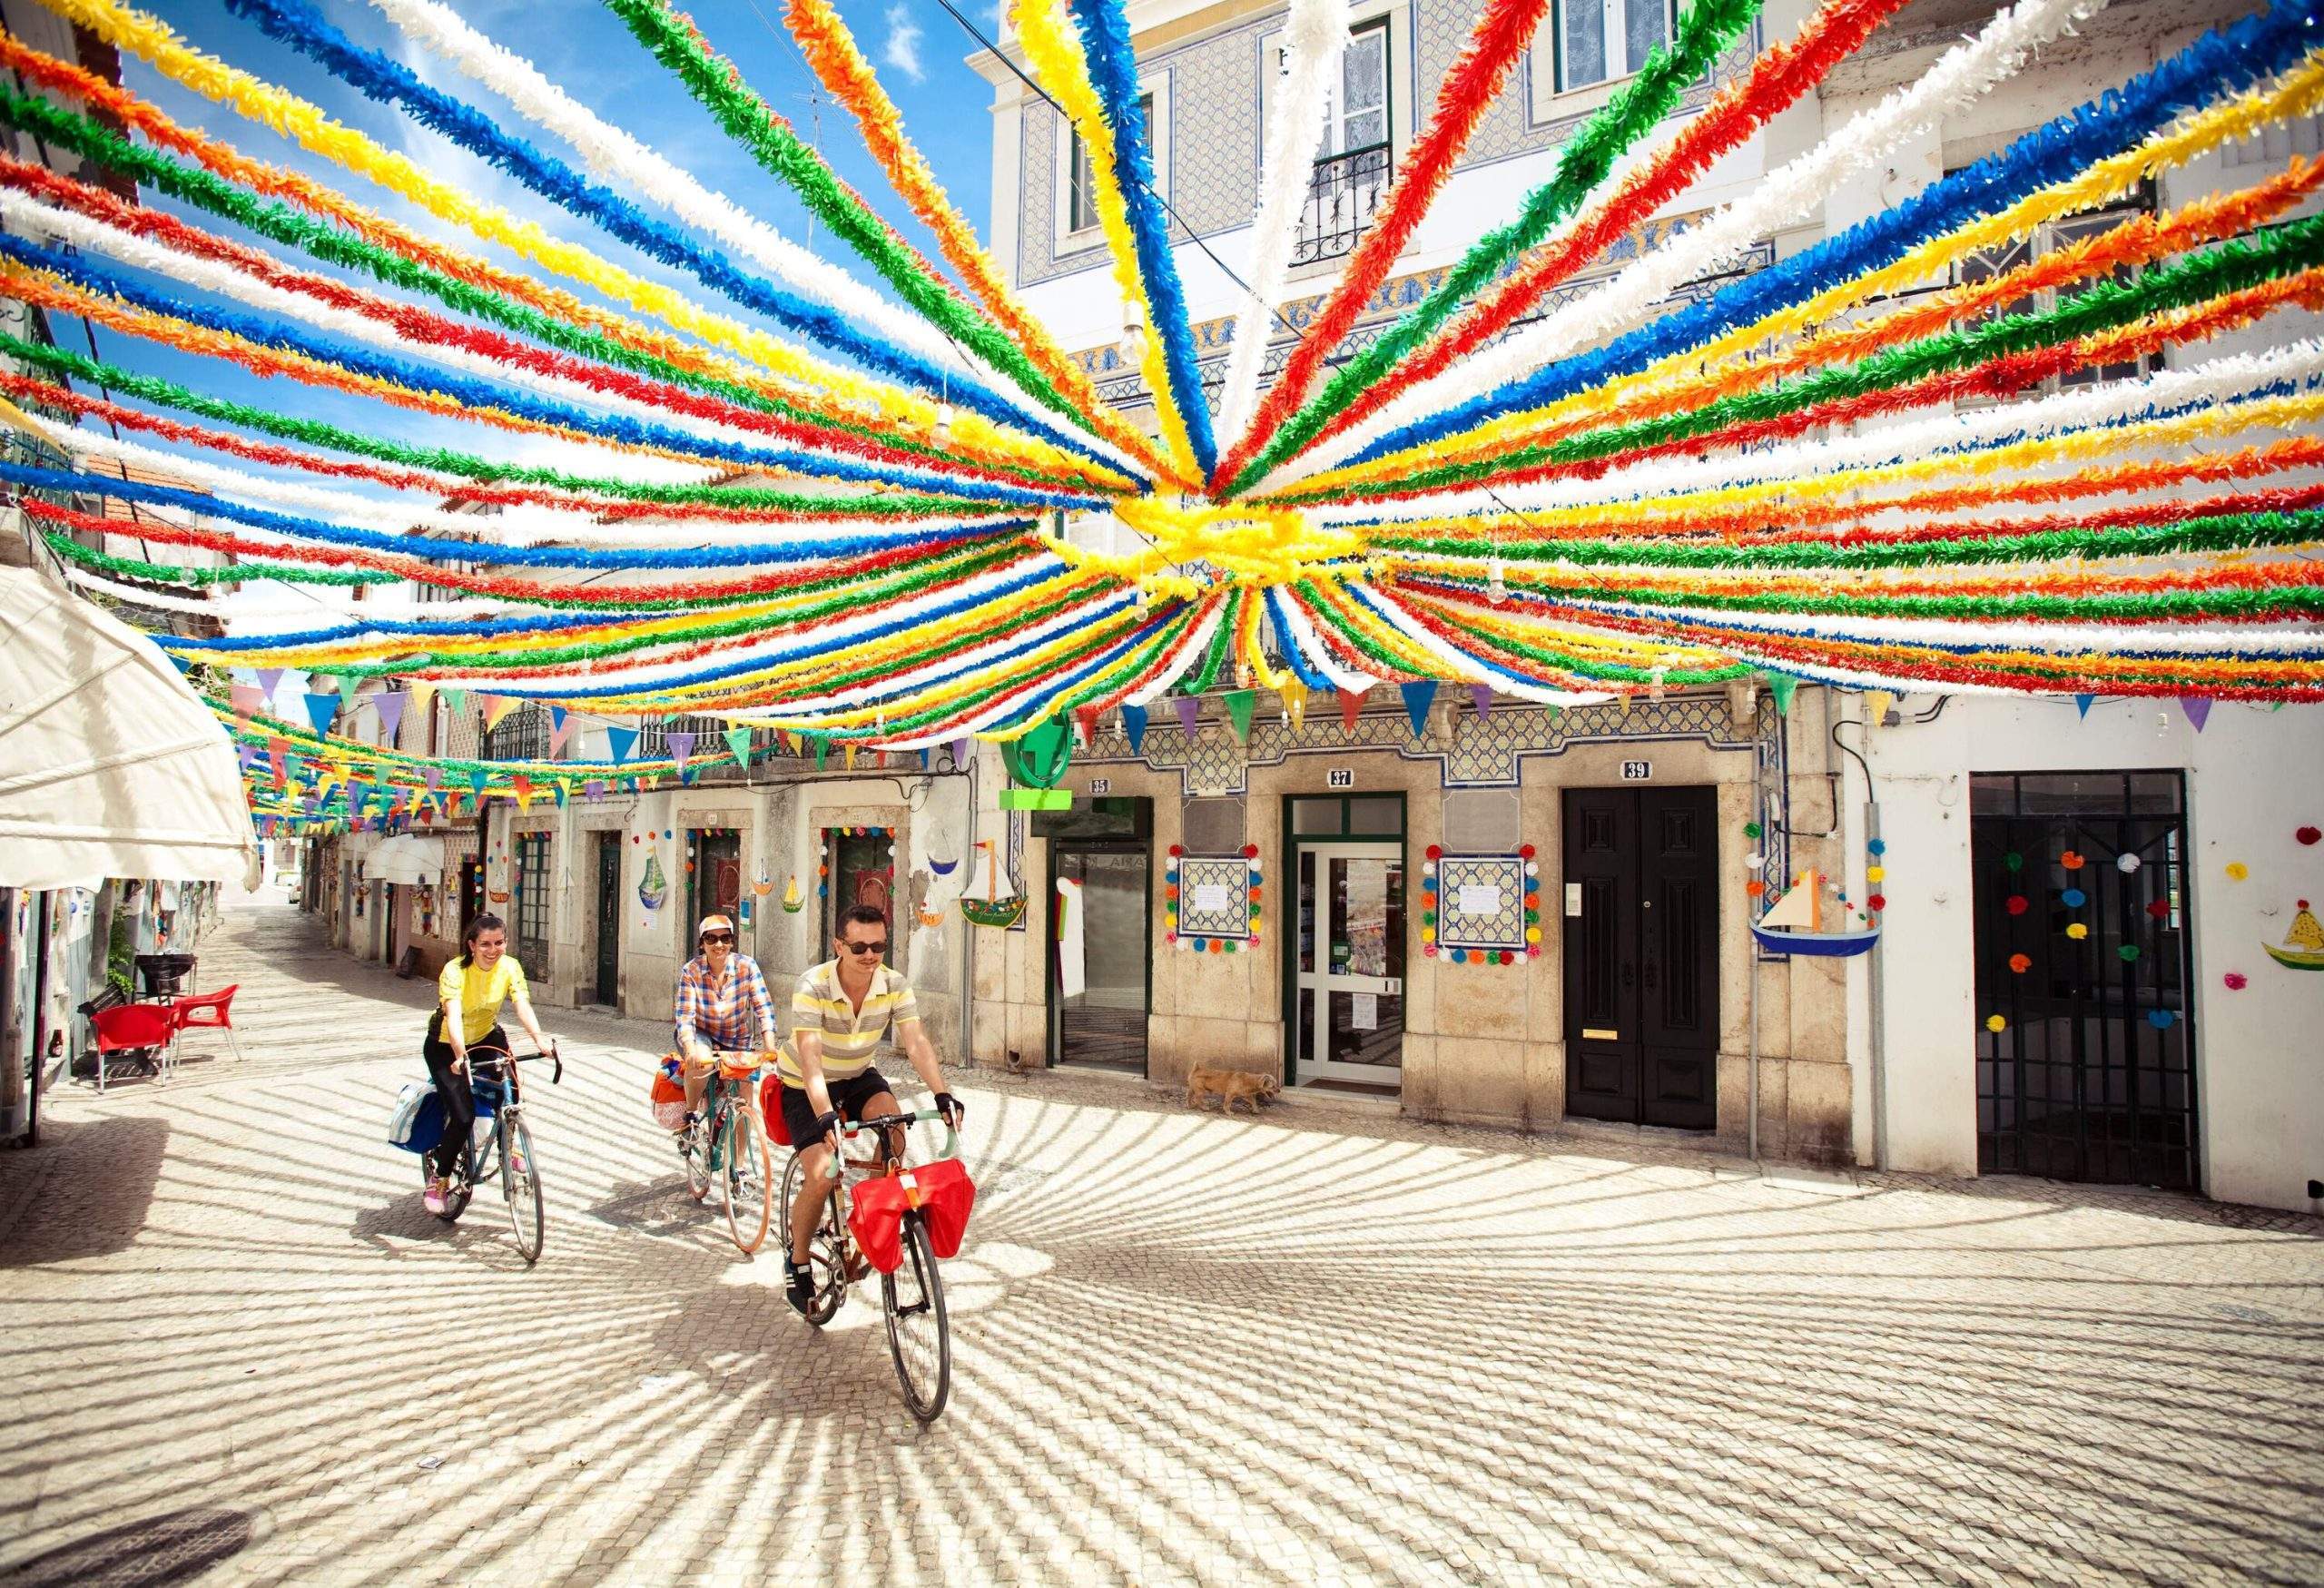 Three riders traverse a lively street where colourful festival streamers flutter overhead, adding to the festive atmosphere as a row of charming houses lines the bustling thoroughfare.